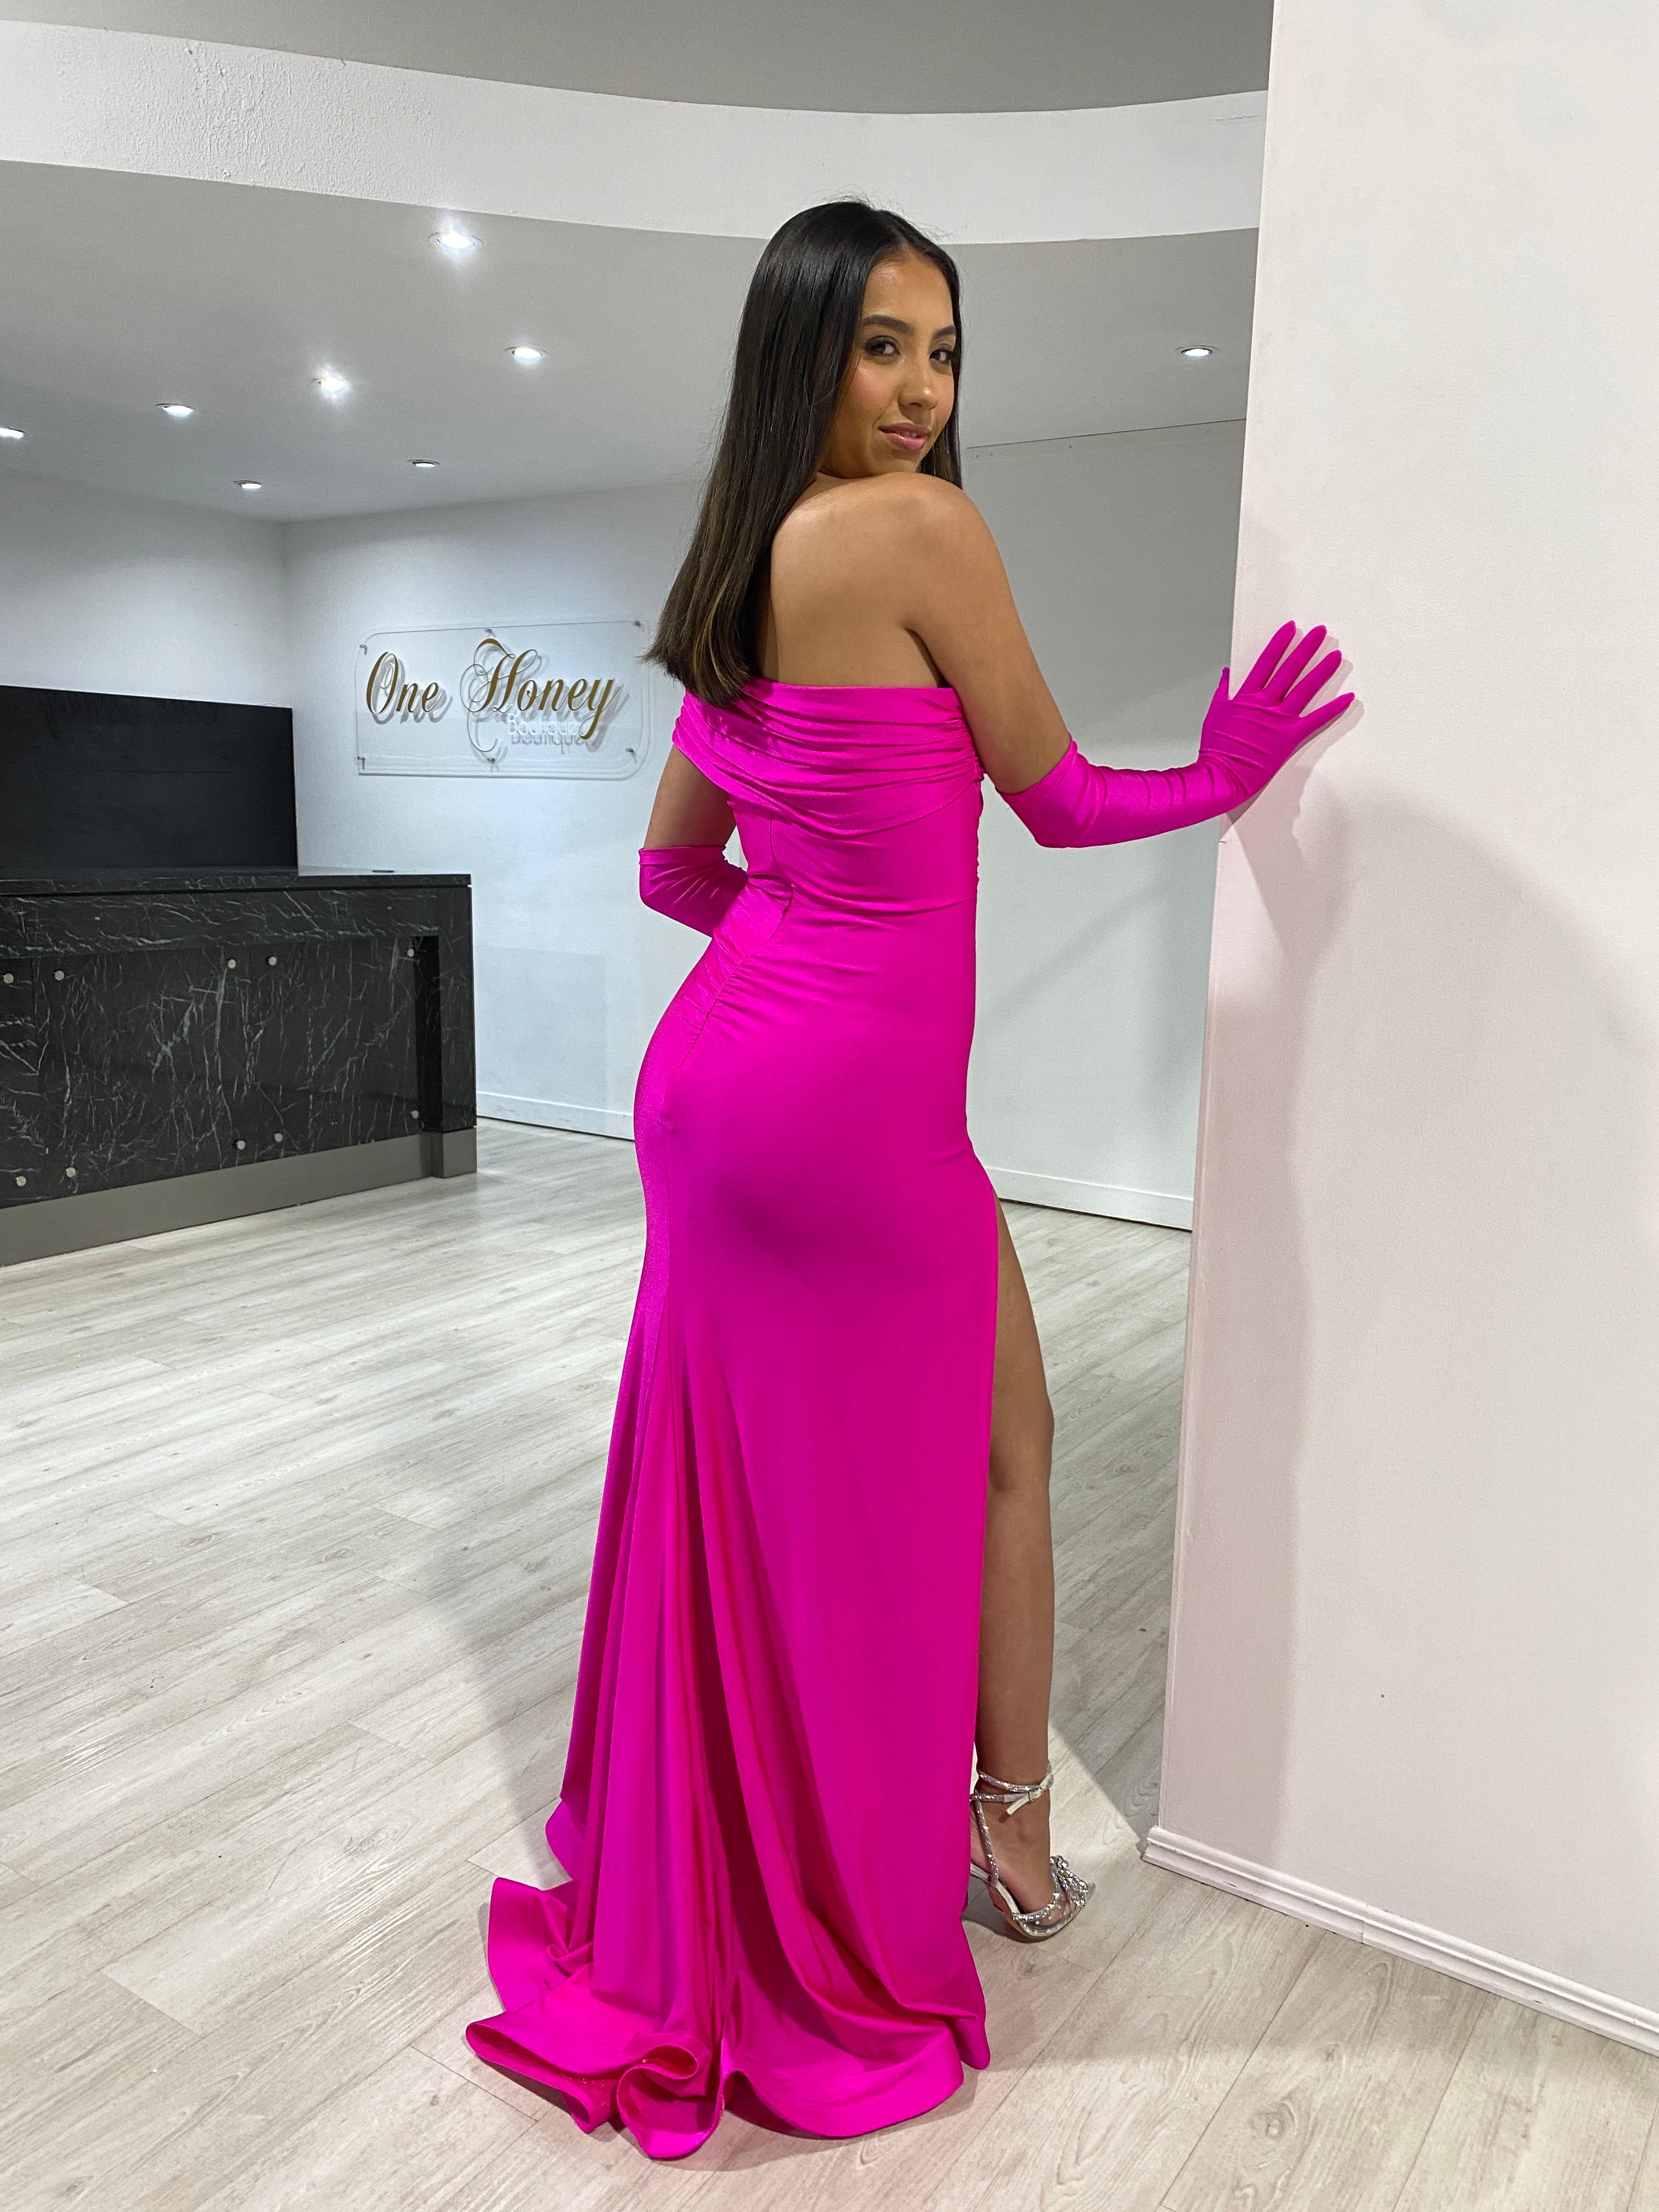 Honey Couture BALENCI-USSY Hot Pink Mermaid Formal Dress w Gloves